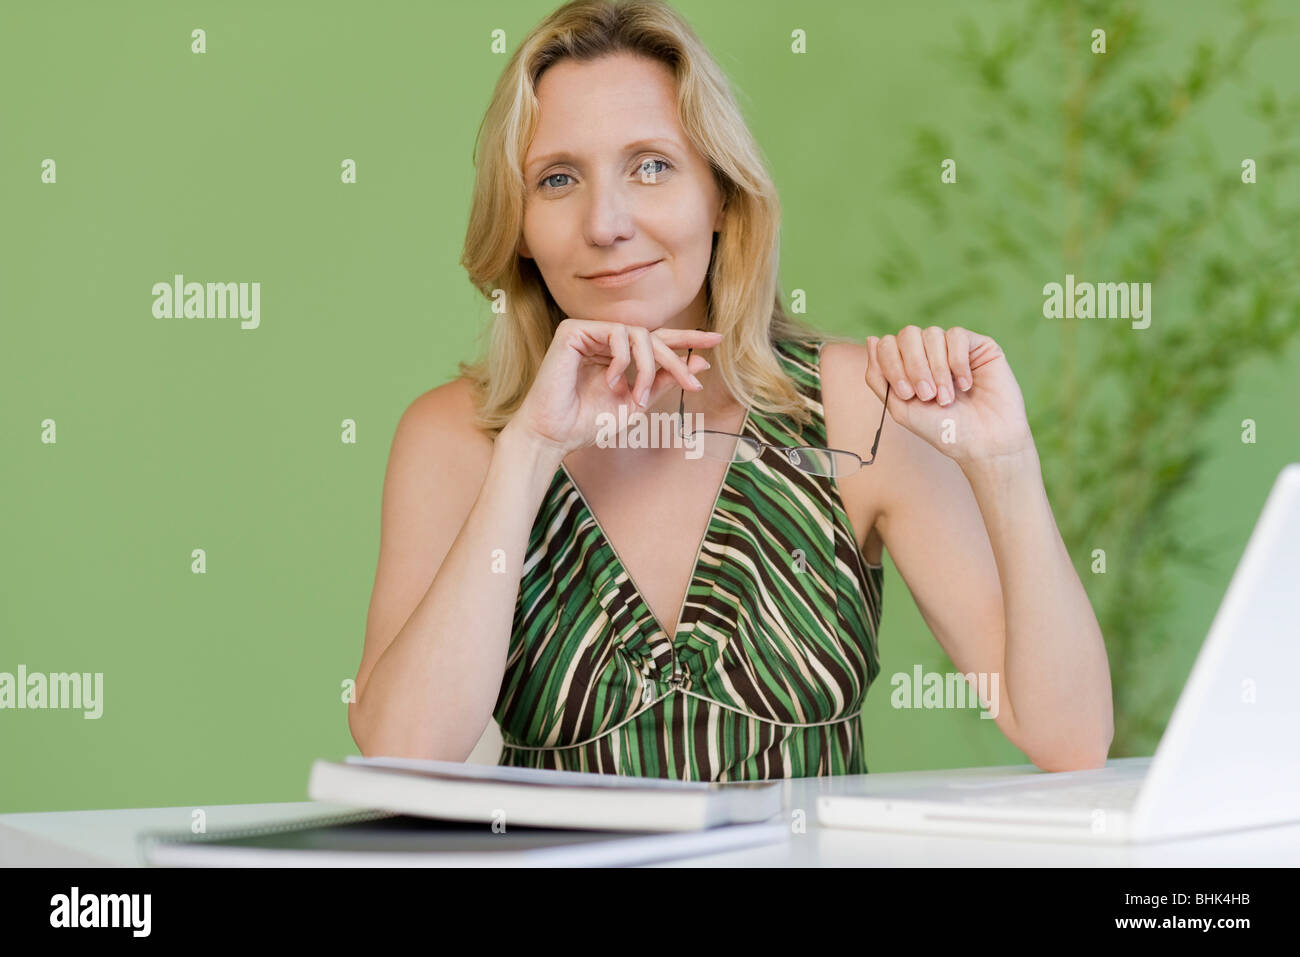 Mature woman with book and laptop computer, portrait Stock Photo